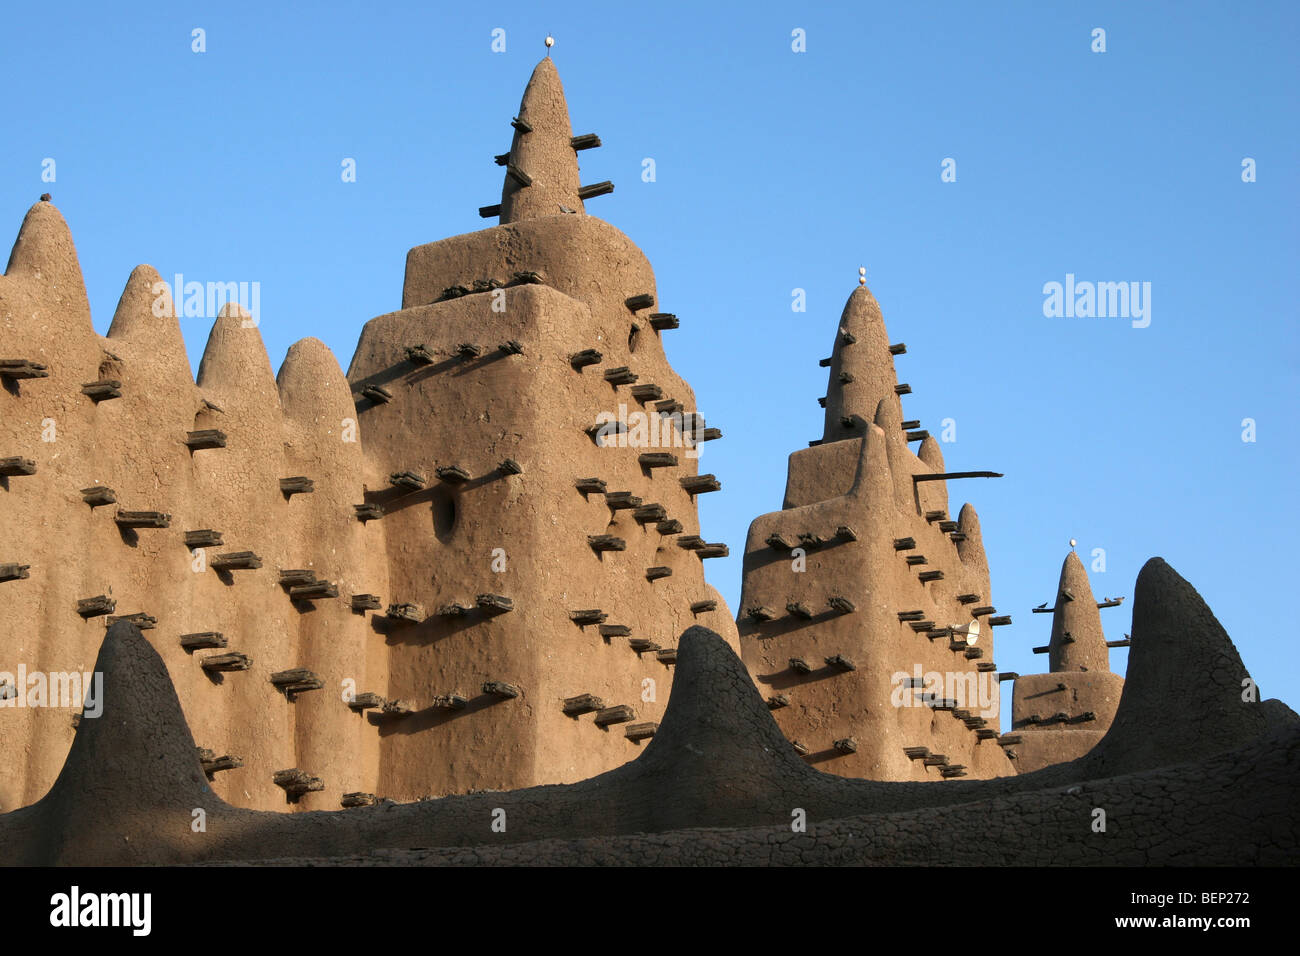 Great Mosque of Djenné, largest mud brick or adobe building in the world, Djenné, Mali, West Africa Stock Photo